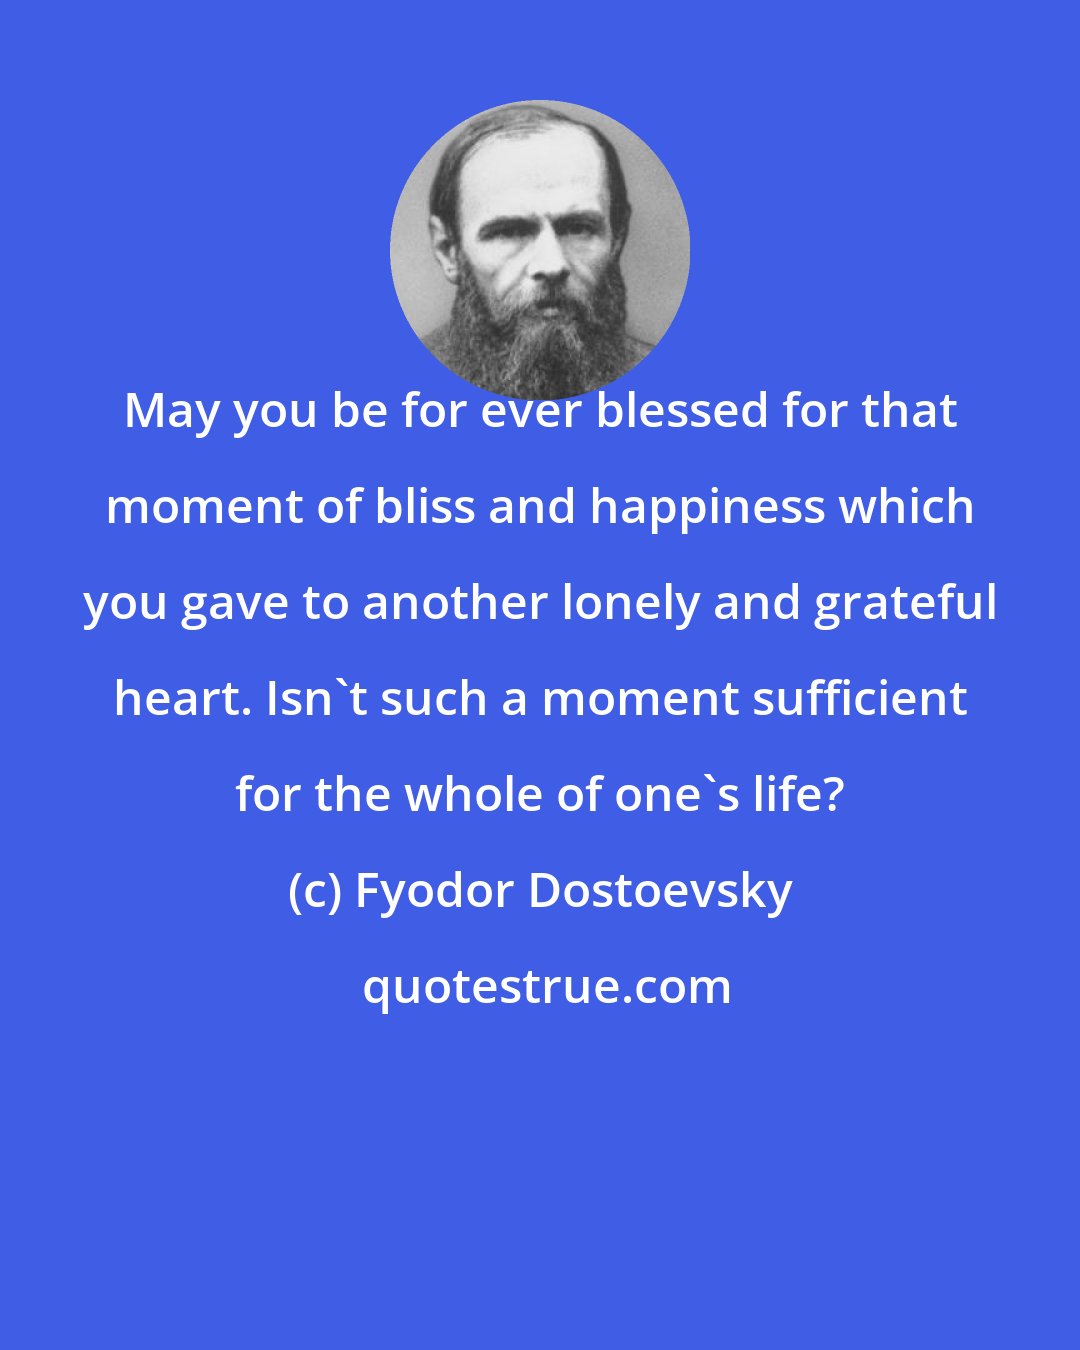 Fyodor Dostoevsky: May you be for ever blessed for that moment of bliss and happiness which you gave to another lonely and grateful heart. Isn't such a moment sufficient for the whole of one's life?